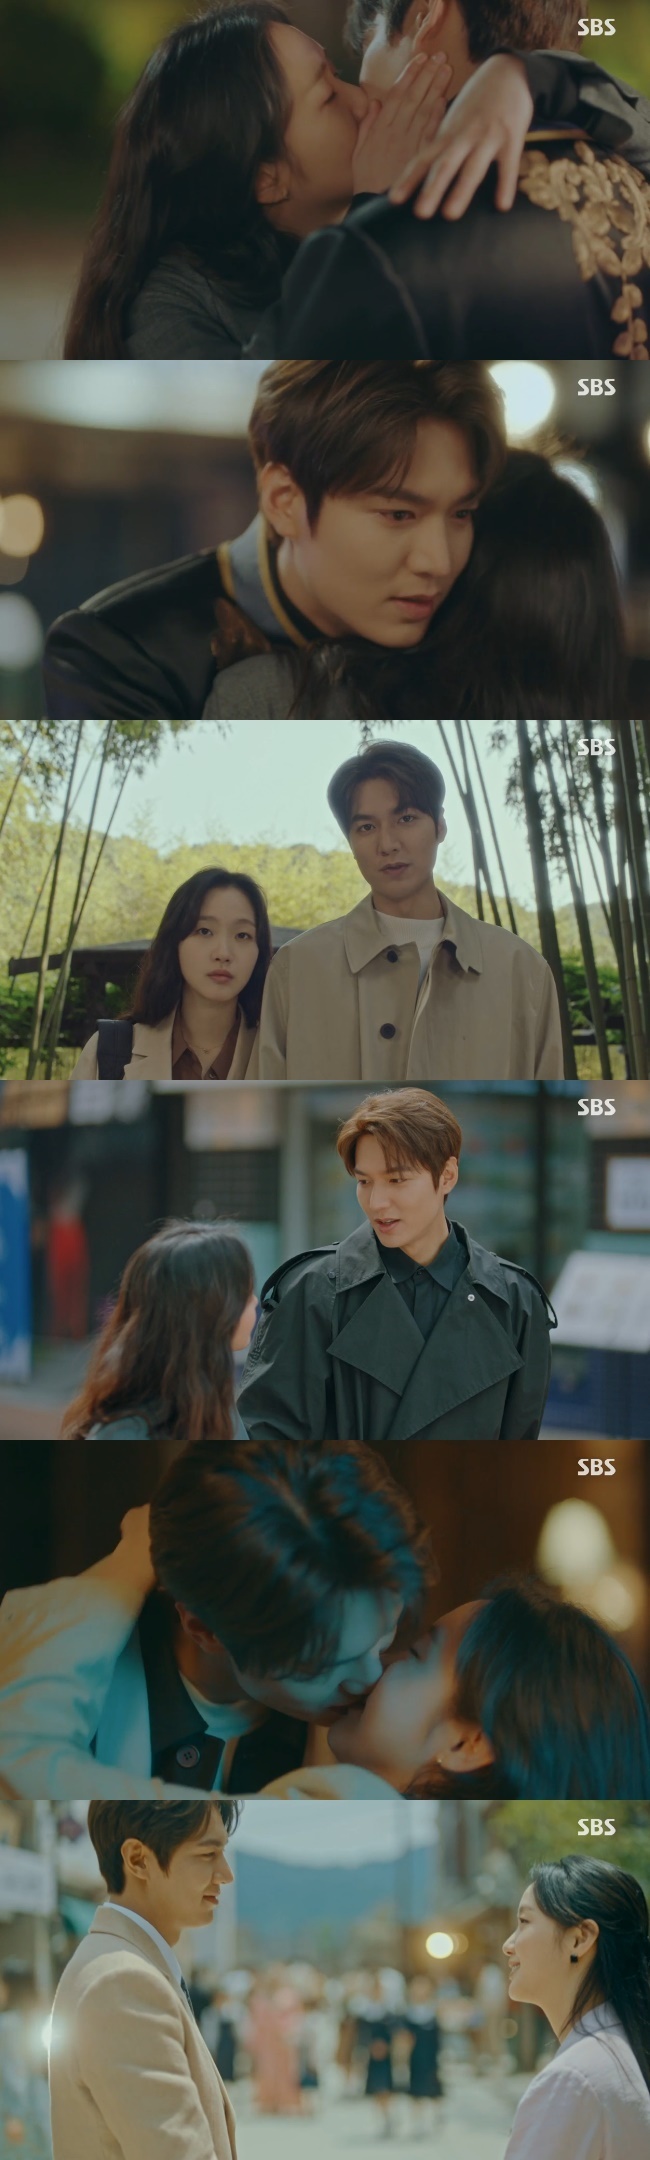 Lee Min-ho and Kim Go-eun have grown love in different worlds.Lee Min-ho and Kim Go-eun traveled across the door of the dimension and traveled parallel World in the 16th episode of SBSs Golden Land Drama The King: The Lord of Eternity (playplayed by Kim Eun-sook/directed by Baek Sang-hoon and Jung Ji-hyun) broadcast on June 12.Joyoung (Woo Do-hwan), who came to the night of the reverse beyond the door of the dimension, refused to tell him to stop the retreat of the reverse enemies.I have to go to Goro Noguchi. It is my job to protect my lord.Igon and Joyoung, directed at Goro Noguchi, had a gunfight with Irim (Lee Jung-jin), who threatened young Igon, and his men.Joyoung kept the young Igon with his life, and Igon followed the runaway Irim with a full-scale escapism.The history of South Korea and Korean Empire has also changed by Lee.Kang Hyun-min (Kim Kyung-nam) saved his life with the help of Lee Jong-in (Jeon Mu-song), and the young Luna changed with the warm consideration of his mother, Koo Seo-ryeong (Jeong Eun-chae).Later, the two grew up as detectives in Korean Empire and raised their work and love together; and Cho Eun-seop (Woo Do-hwan), of South Korea, later worked for the National Intelligence Service.Jung Tae-eul, who returned to his daily life, accidentally met Lee Ji-hoon (Lee Min-ho) who had the same face as Igon on the road.Lee Ji-hoon, who was walking in uniform, passed himself, and Jung Tae-eun sat down and cried, recalling Lees promise to come to see him even if he opened the door of the whole universe.Lee opened the door of the whole universe as promised, searched for the stationary state, and after going to various worlds, he met Jeong Tae.Fortunately, Jung Tae-eul, who had not been forgotten, recognized Igon immediately, and Igon said, I finally see you. I am a lieutenant.Igon handed the flowers he had brought to Jung Tae-eun and confessed, I did not say this. I love you. I love you very much.Jung Tae-eul noticed that the same scene he had seen before meant, and replied, This is the completion. I love you so much.Lee Ha-na